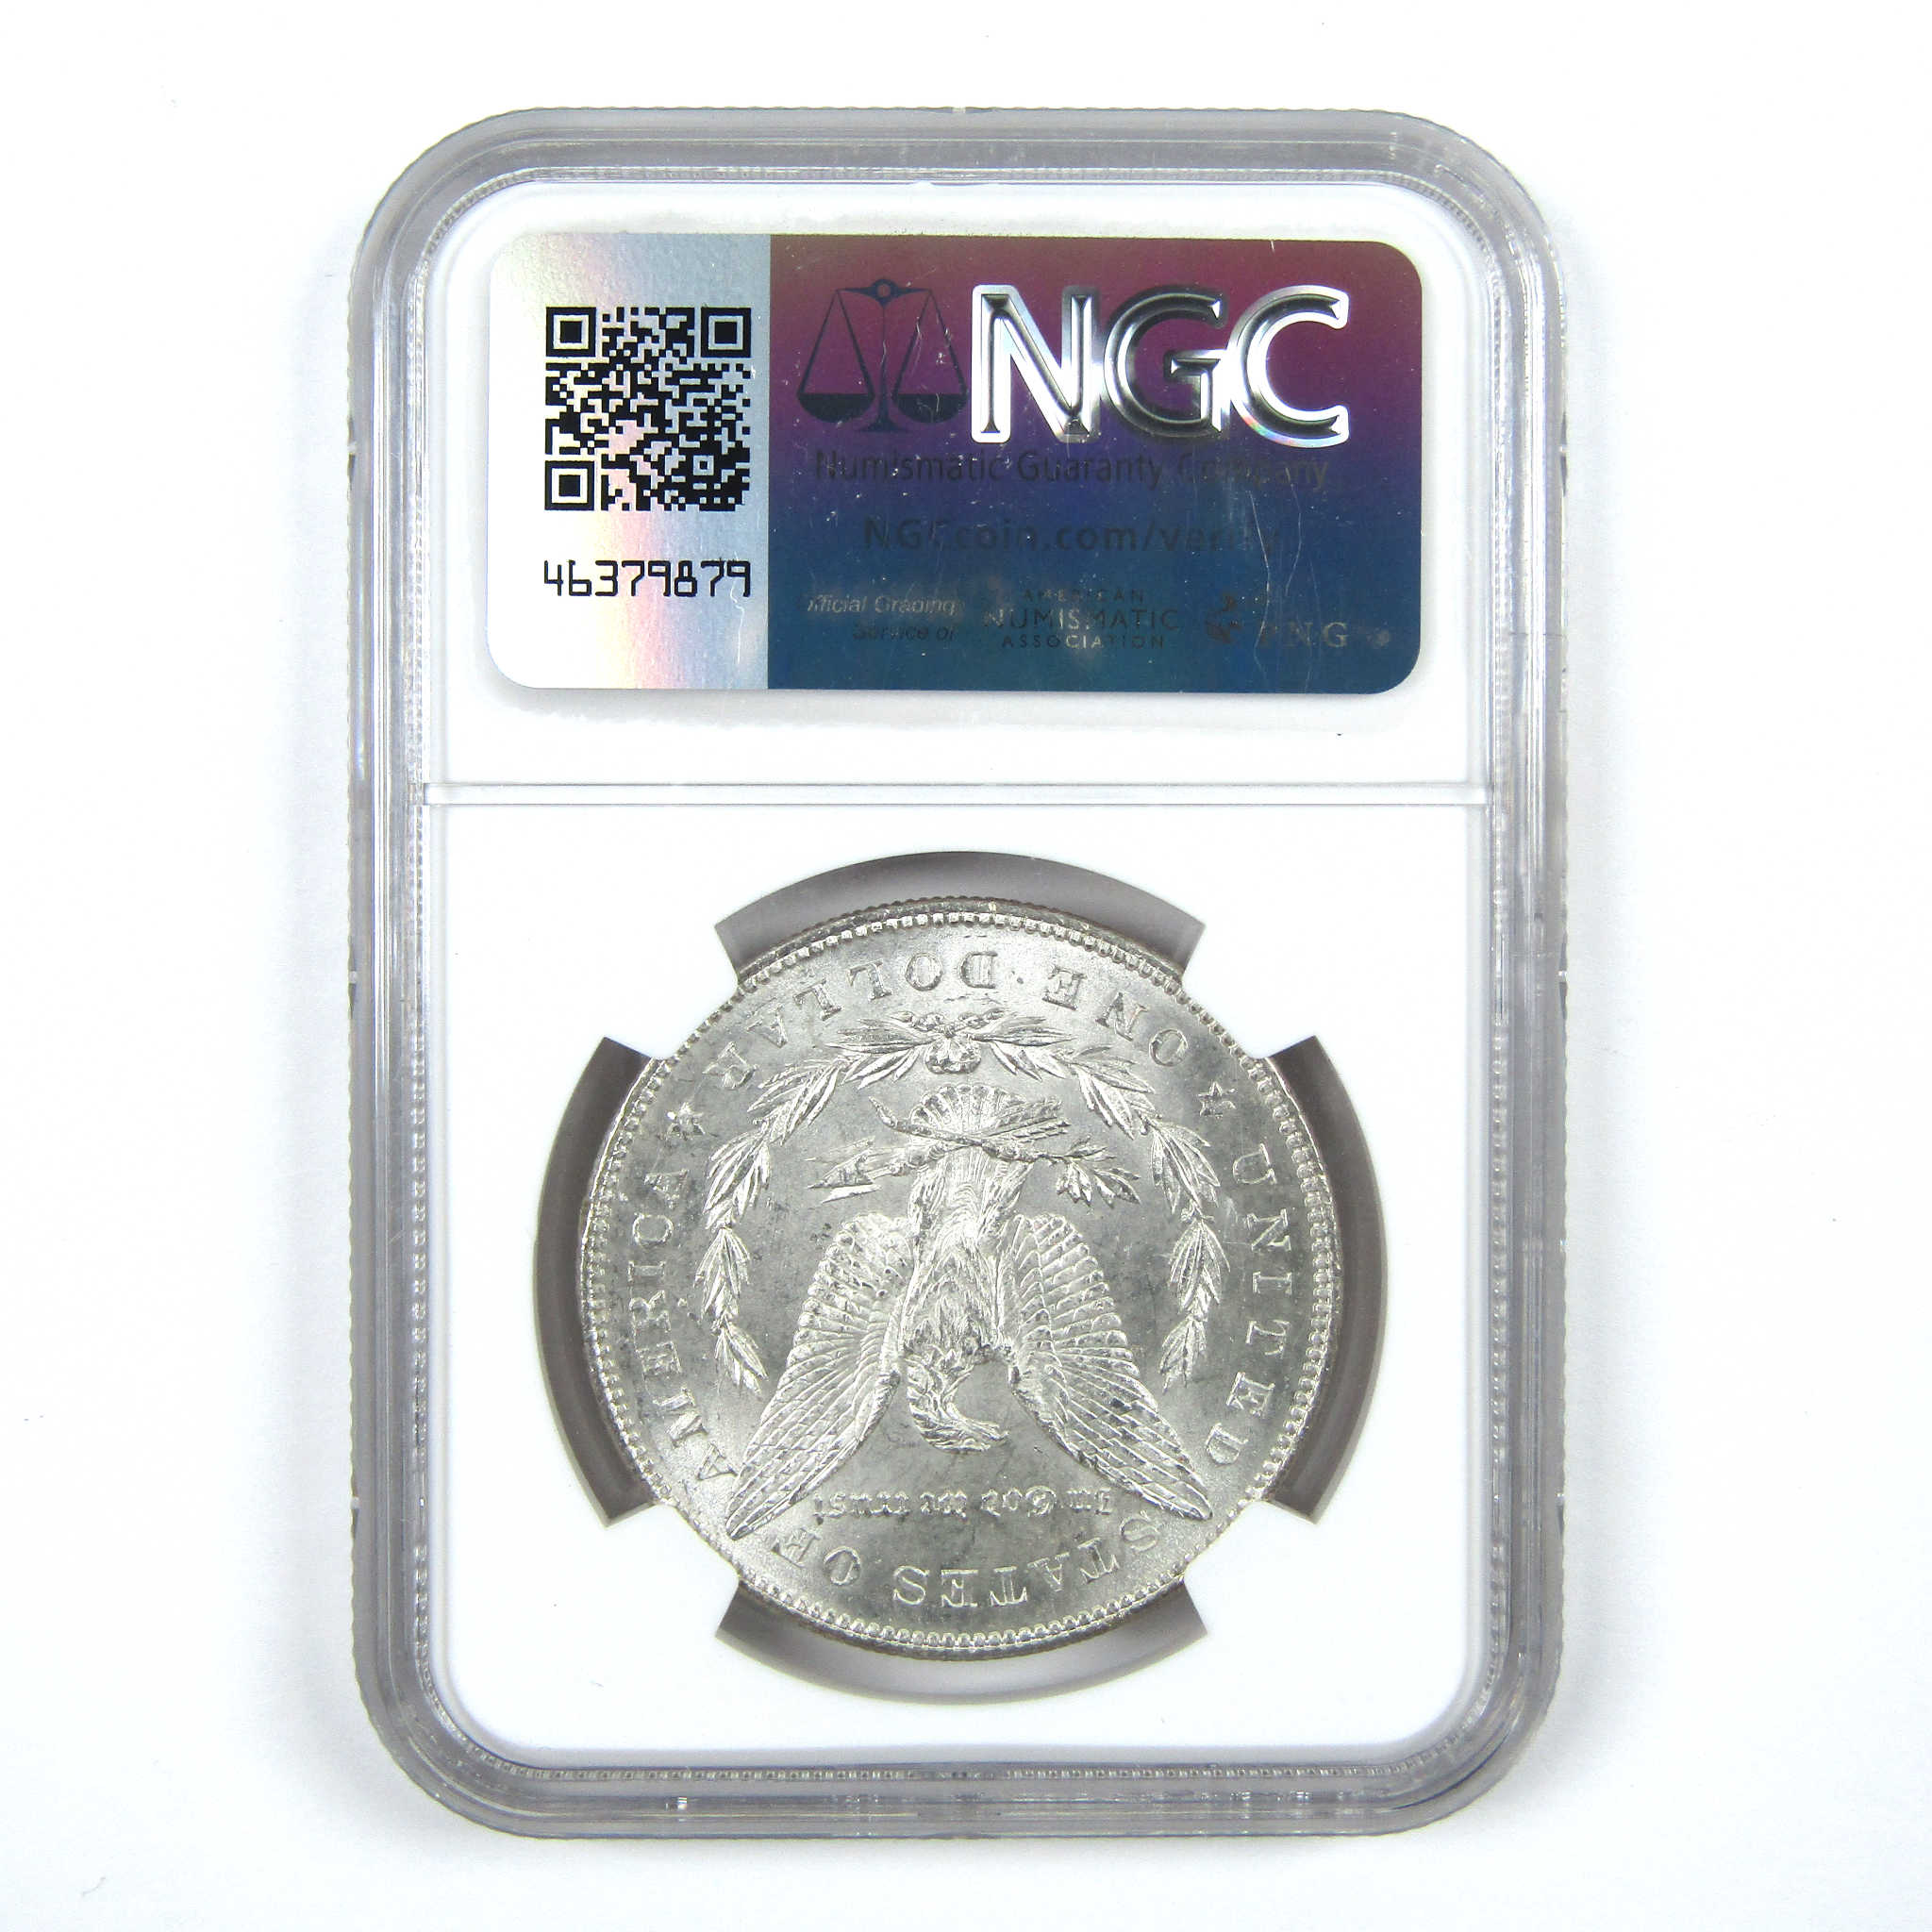 1878 7TF Rev 78 Morgan Dollar MS 62 NGC Uncirculated SKU:I14018 - Morgan coin - Morgan silver dollar - Morgan silver dollar for sale - Profile Coins &amp; Collectibles